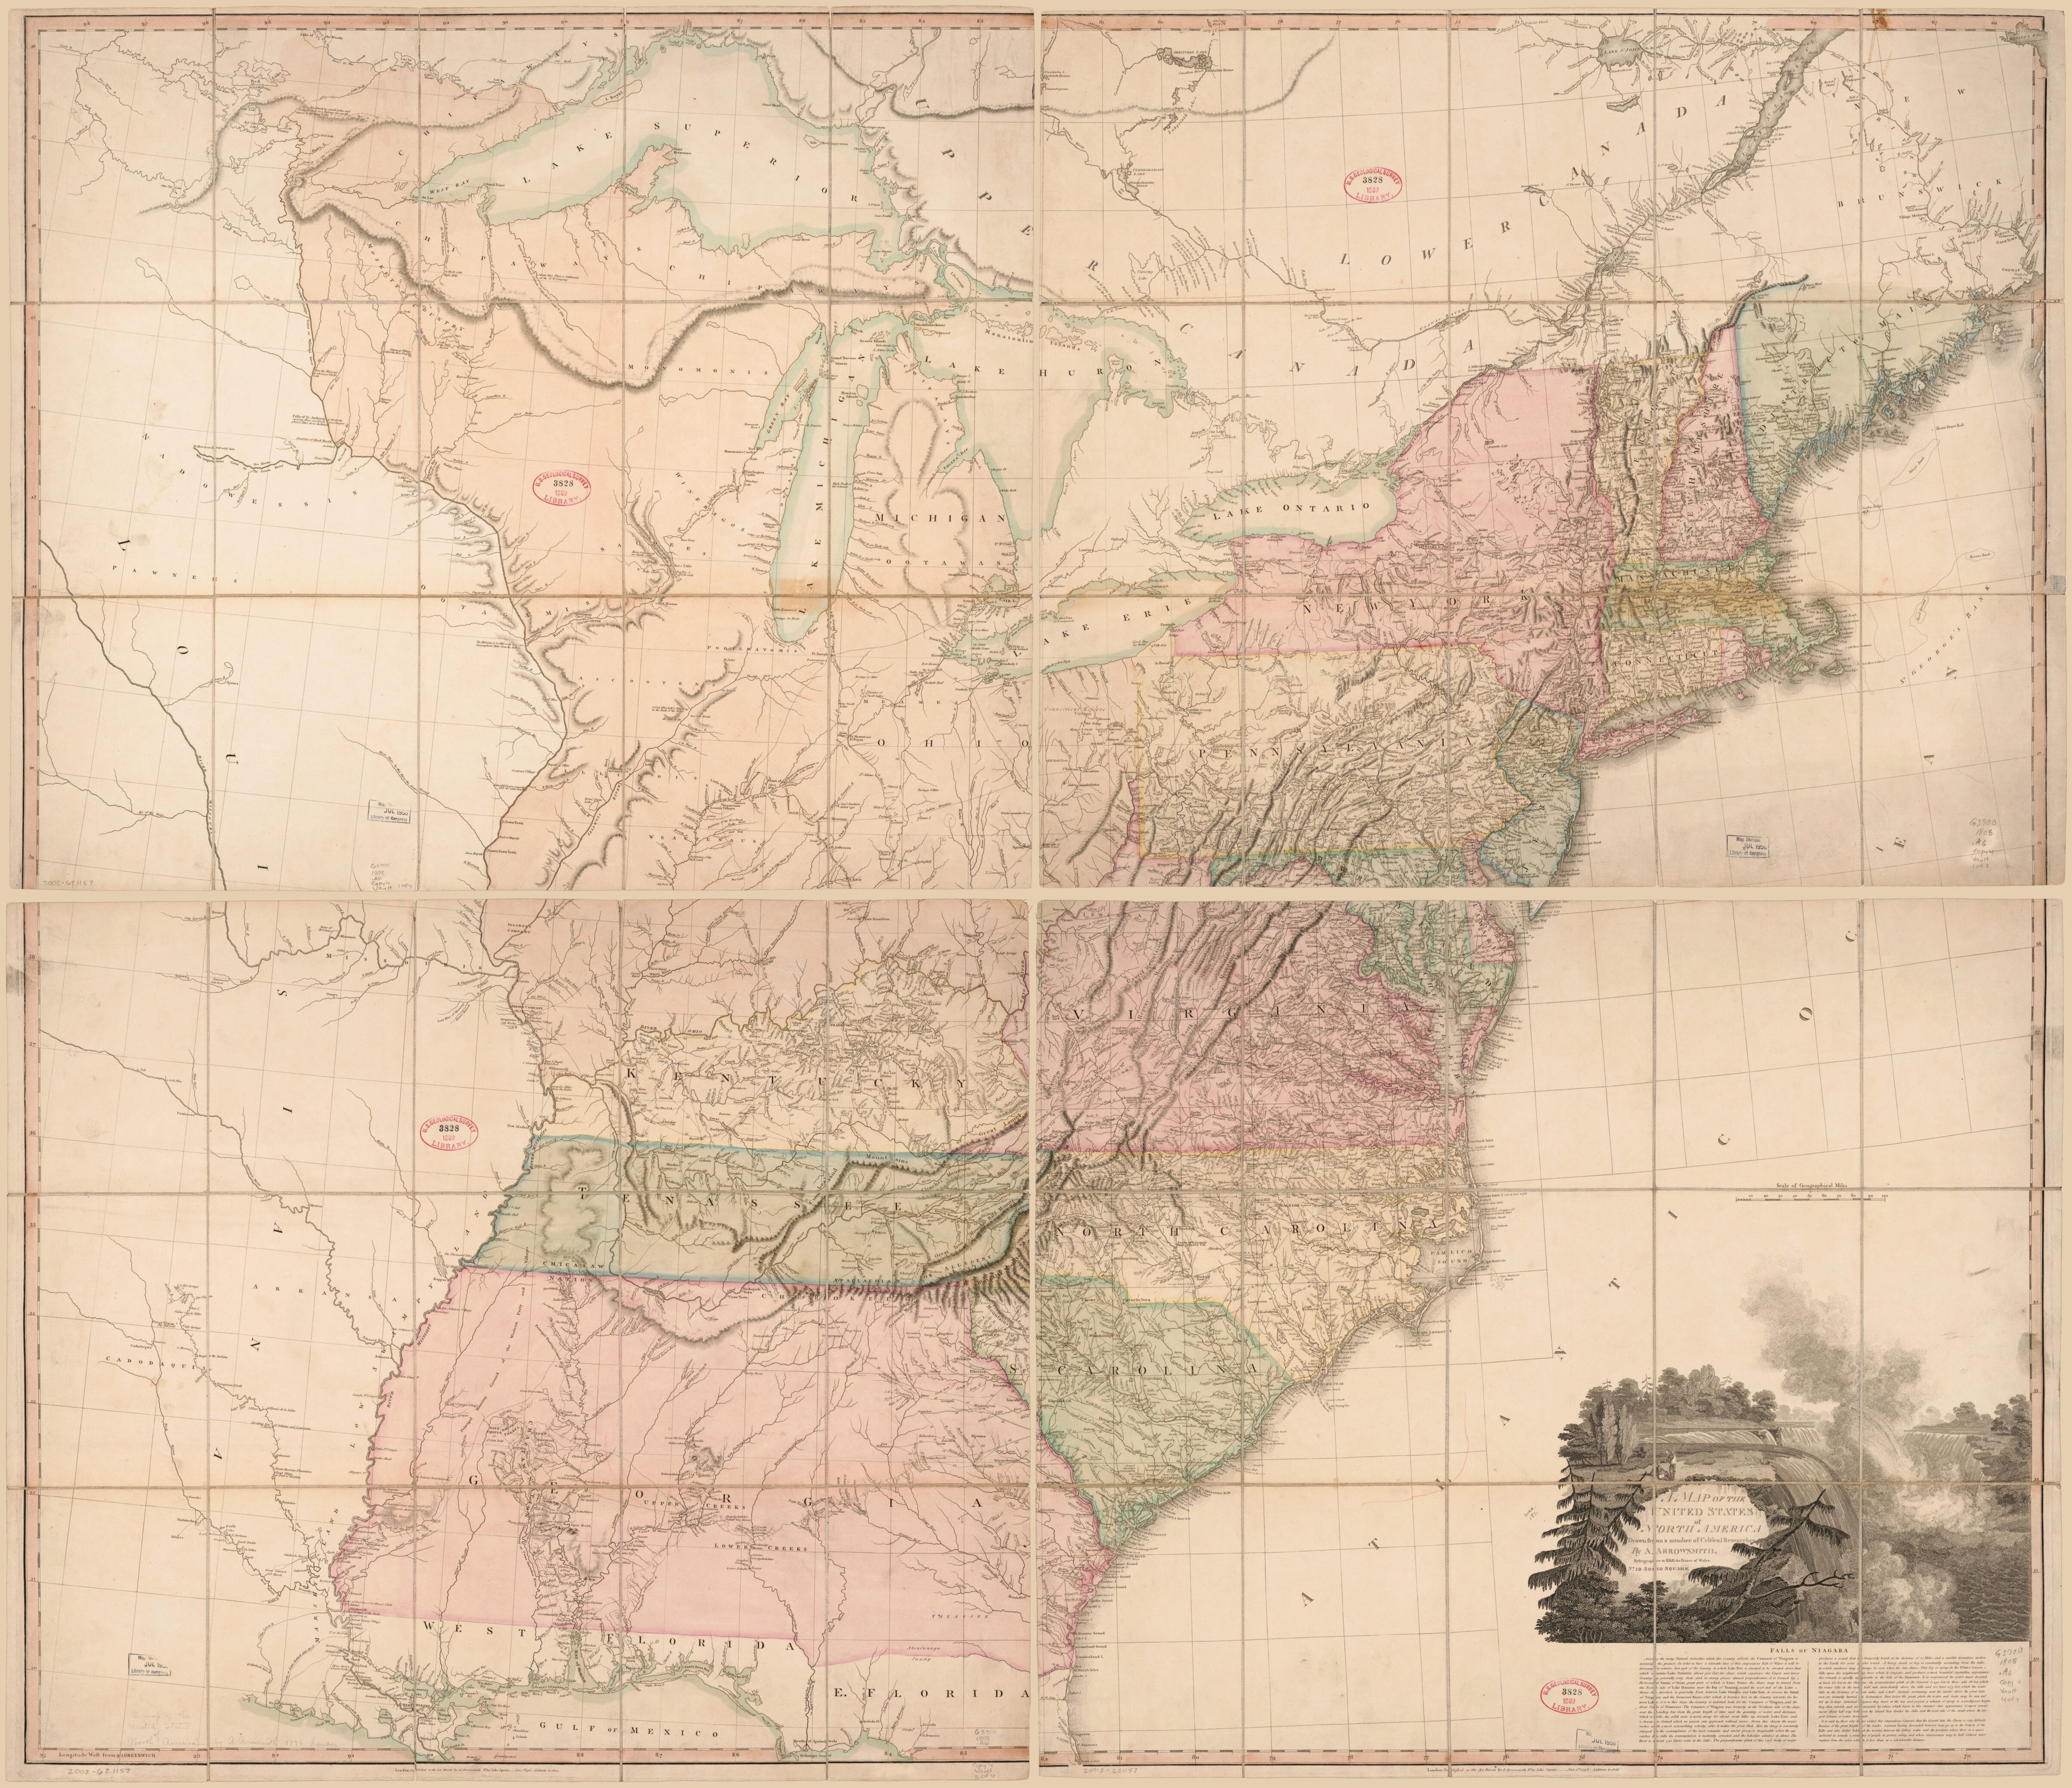 This old map of A Map of the United States of North America from 1811 was created by Aaron Arrowsmith in 1811